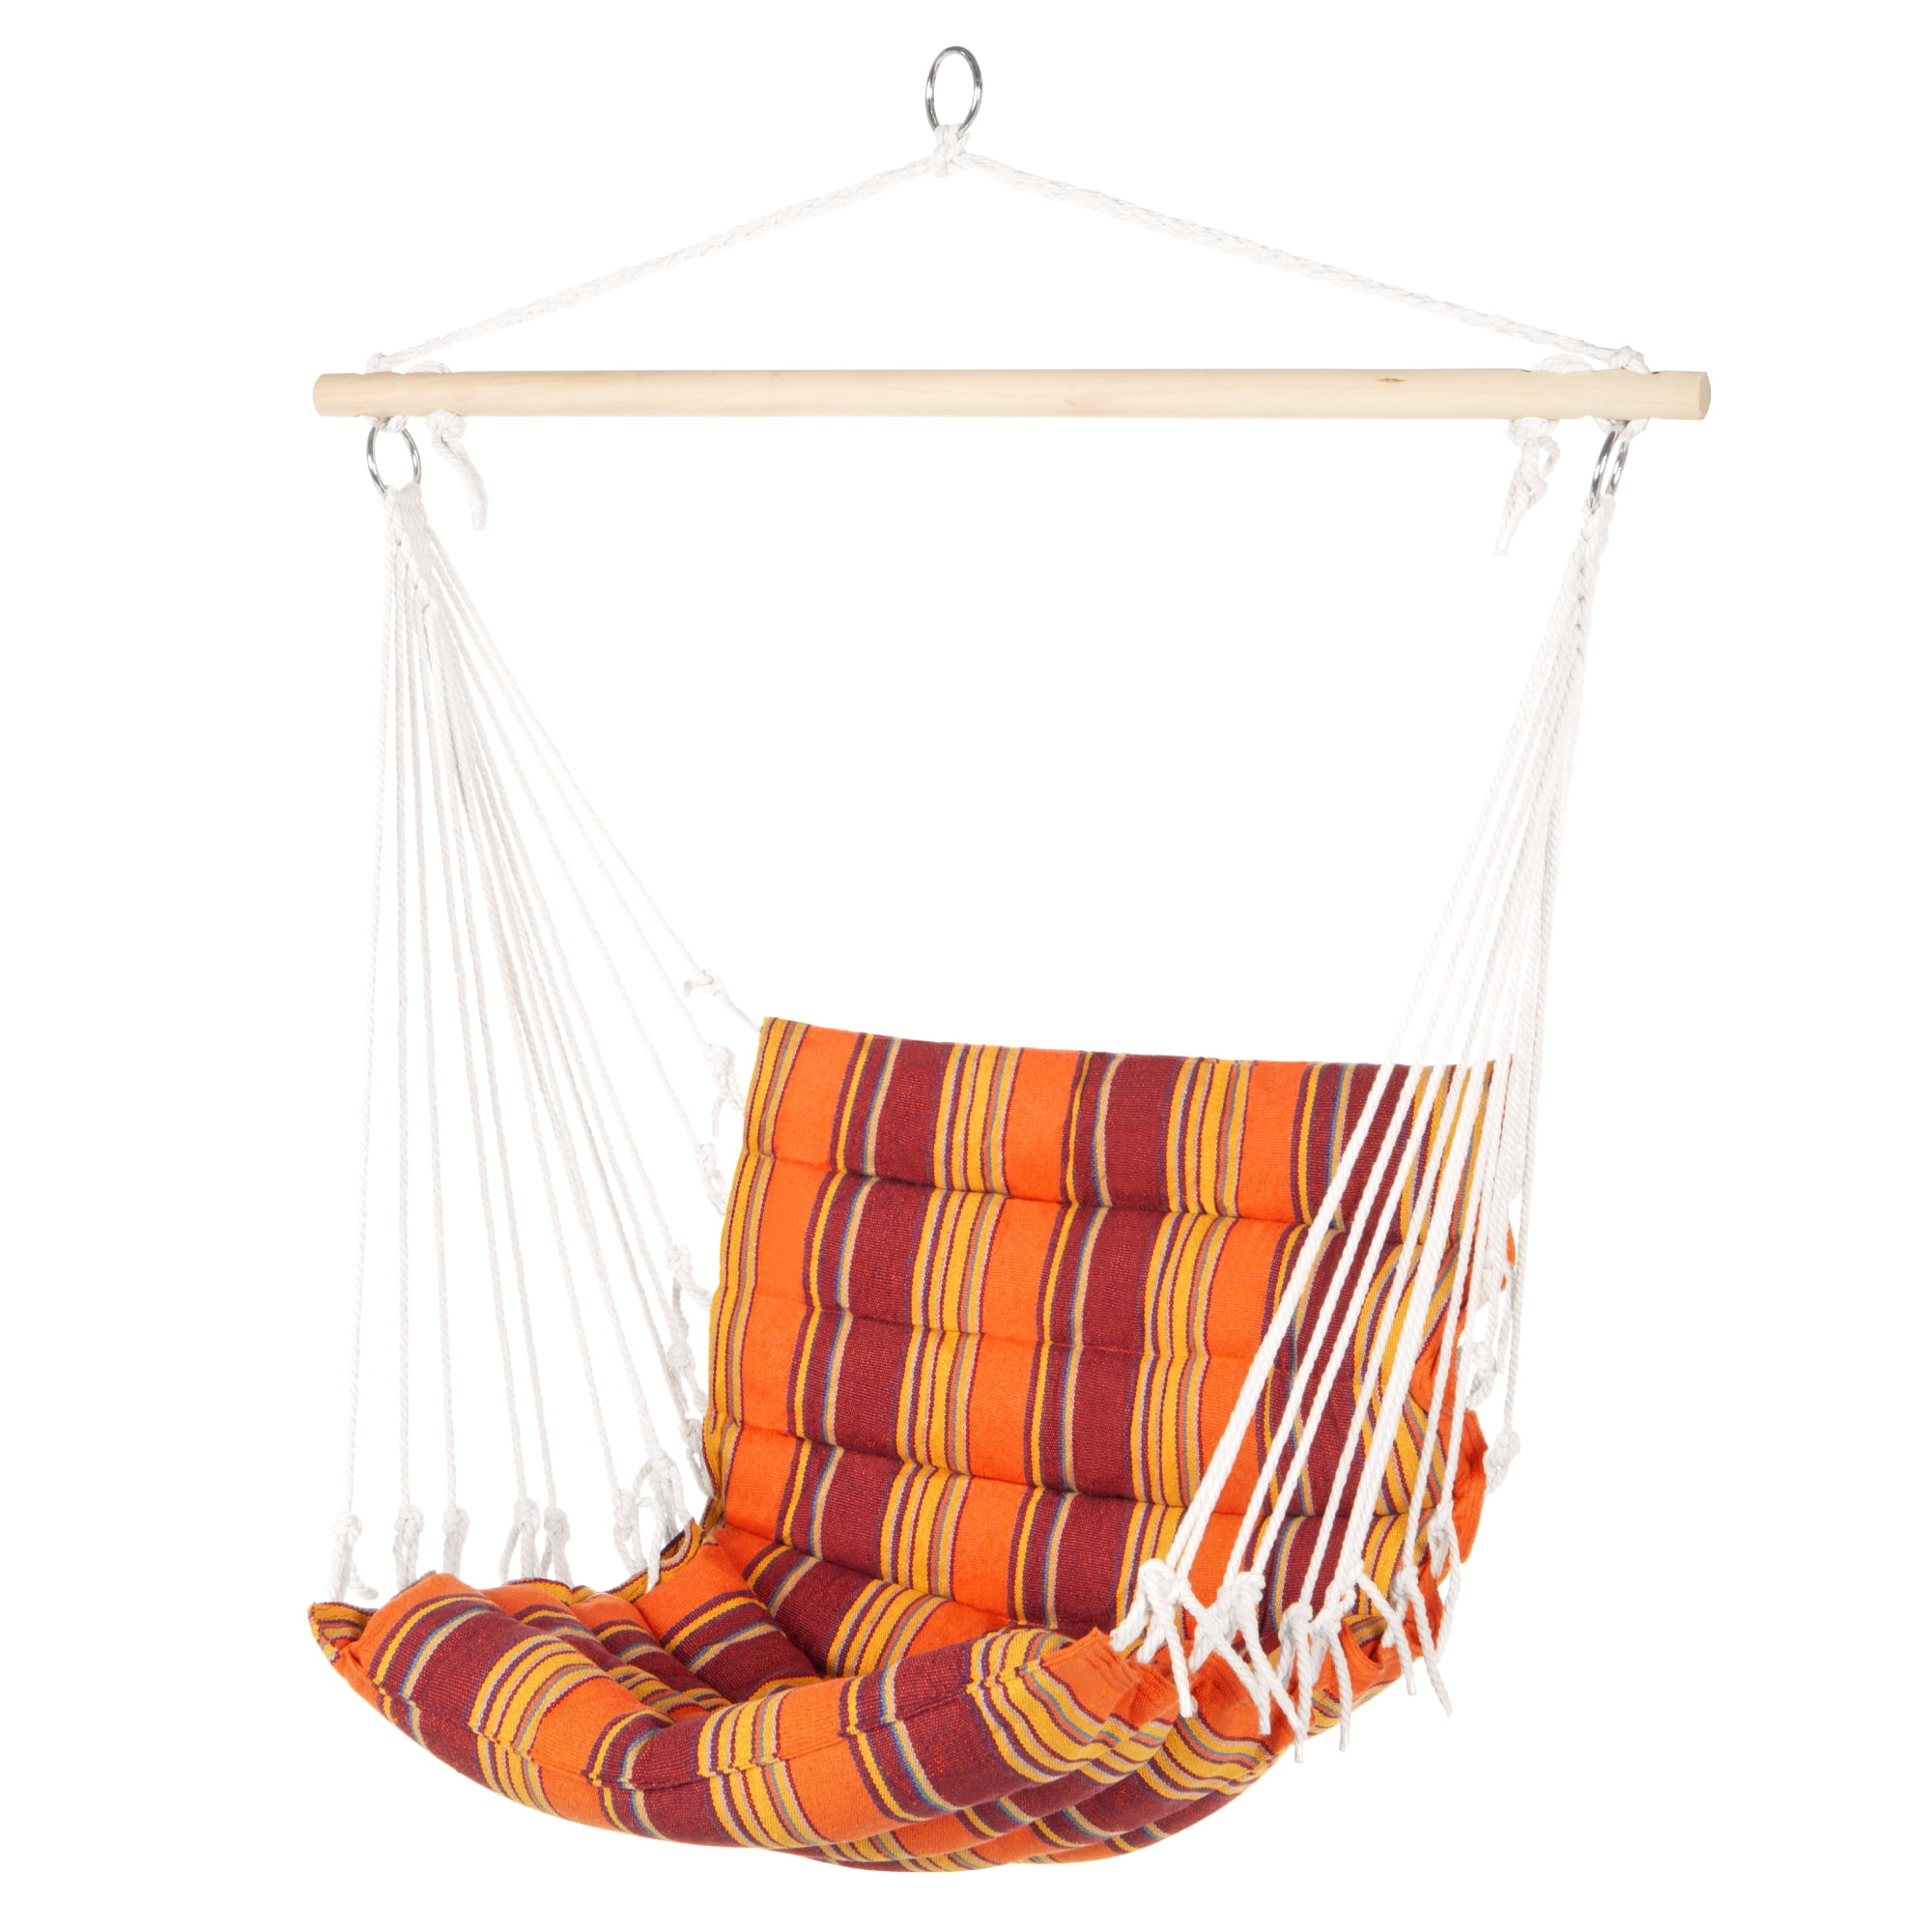 Details about   Perfect Hanging Kids Hammock Swing Elastic Fabric Soft Seat Outdoor Indoor 2021 